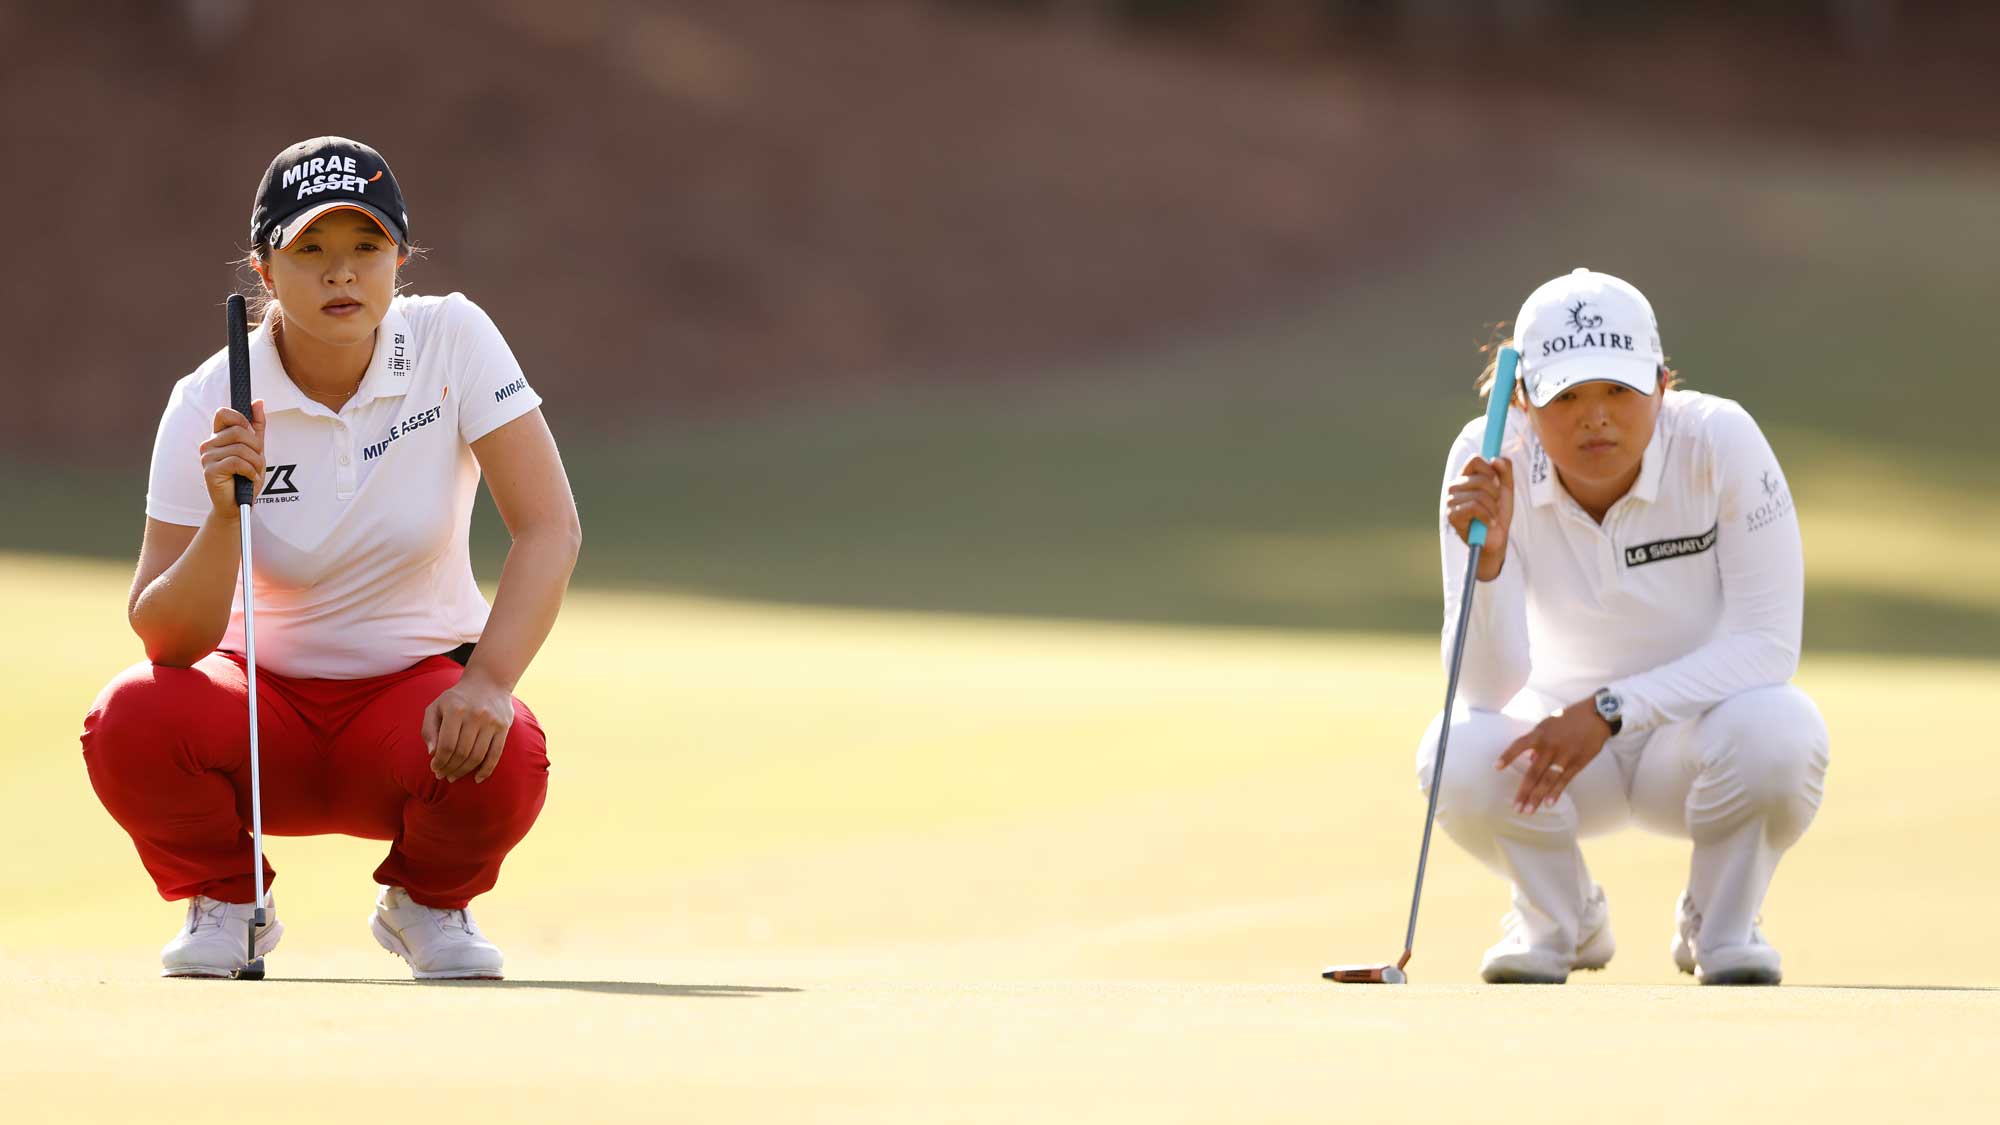 Jin Young Ko of Korea and Sei-Young Kim of Korea look over their putt on the third green during the final round of the CME Group Tour Championship